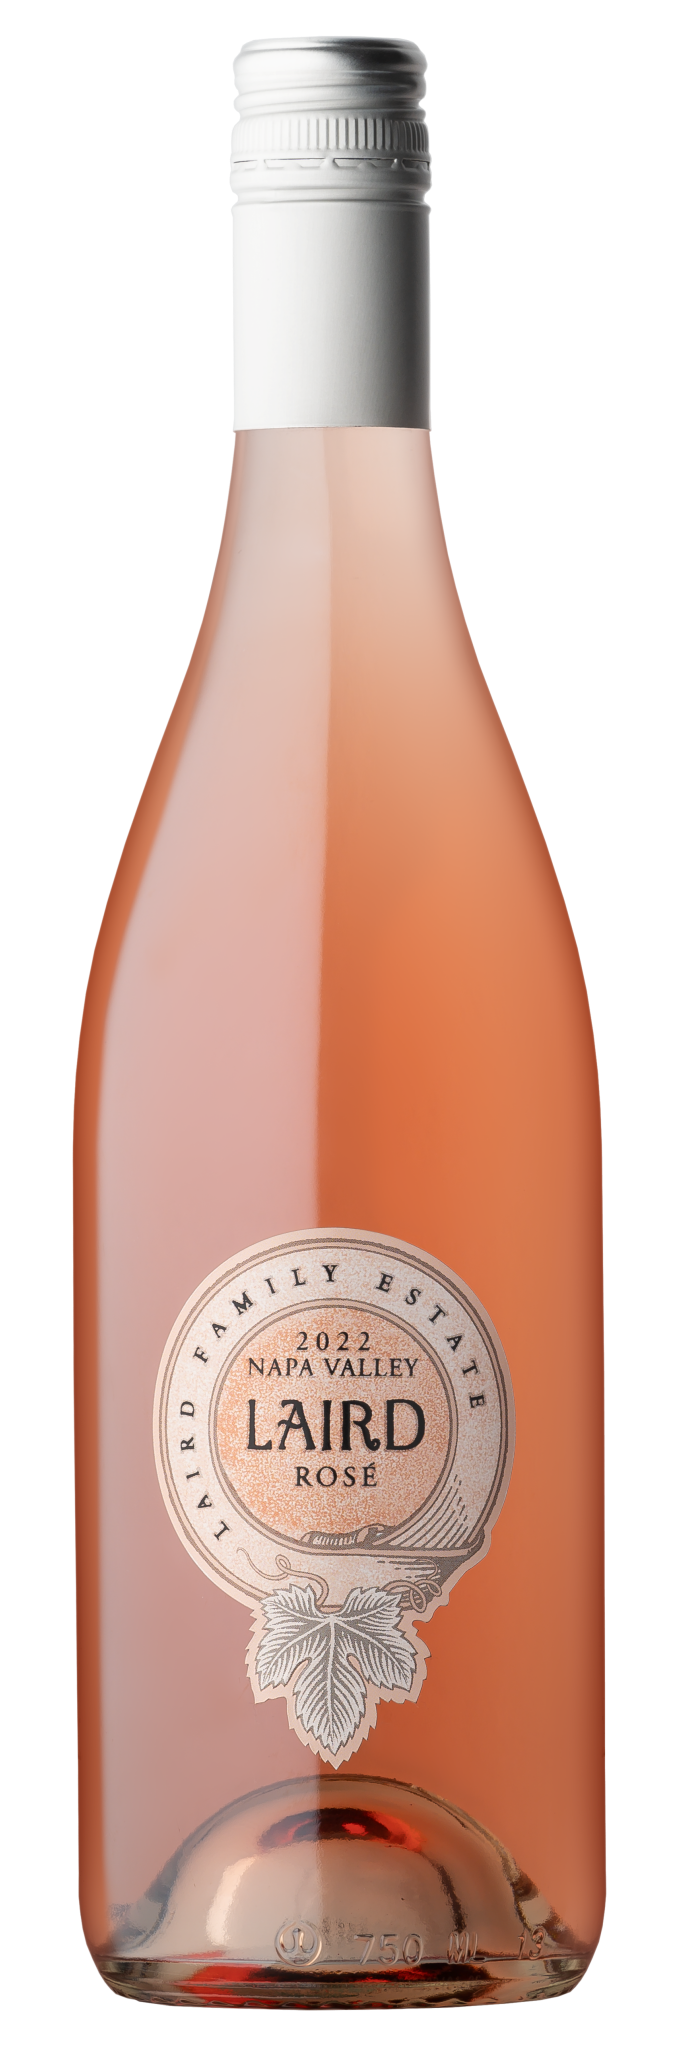 Product Image for 2022 Napa Valley Rosé